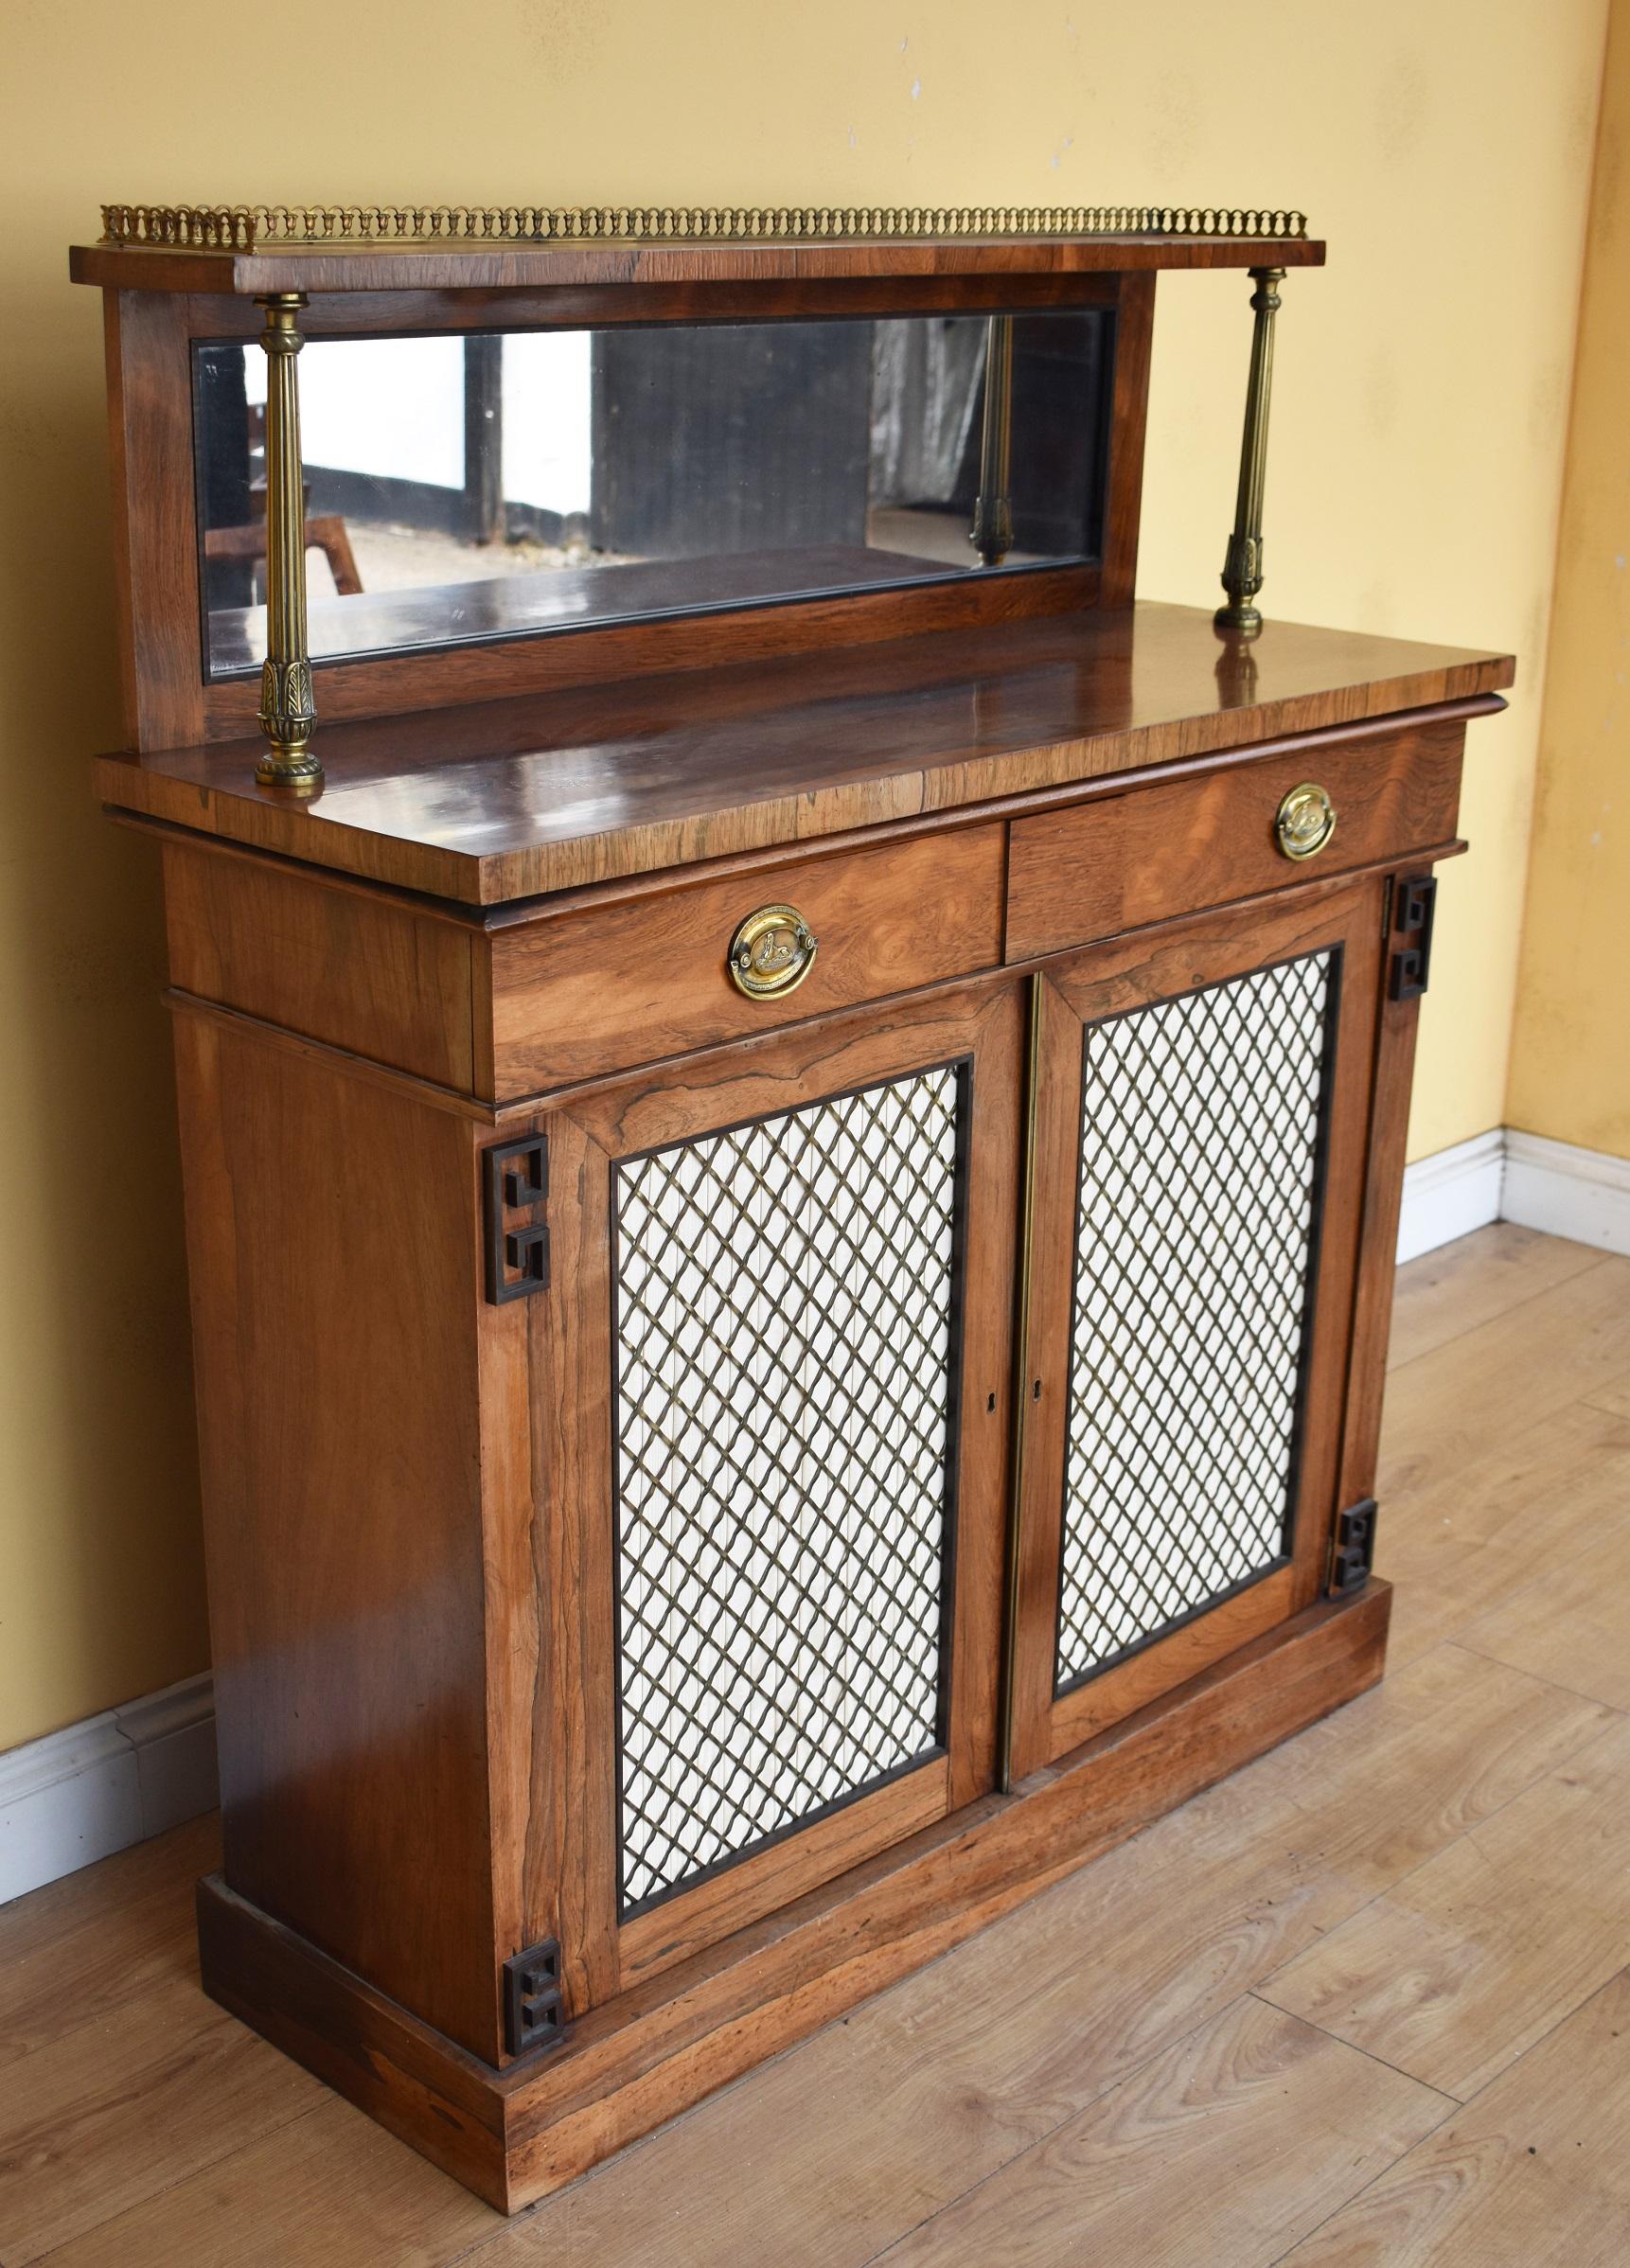 For sale is a good quality Regency rosewood chiffonier with brass gallery shelf, above a drawer with two brass handles above two cupboard doors, each with brass grille and silk lining, opening to reveal a single shelf. The chiffonier is raised on a